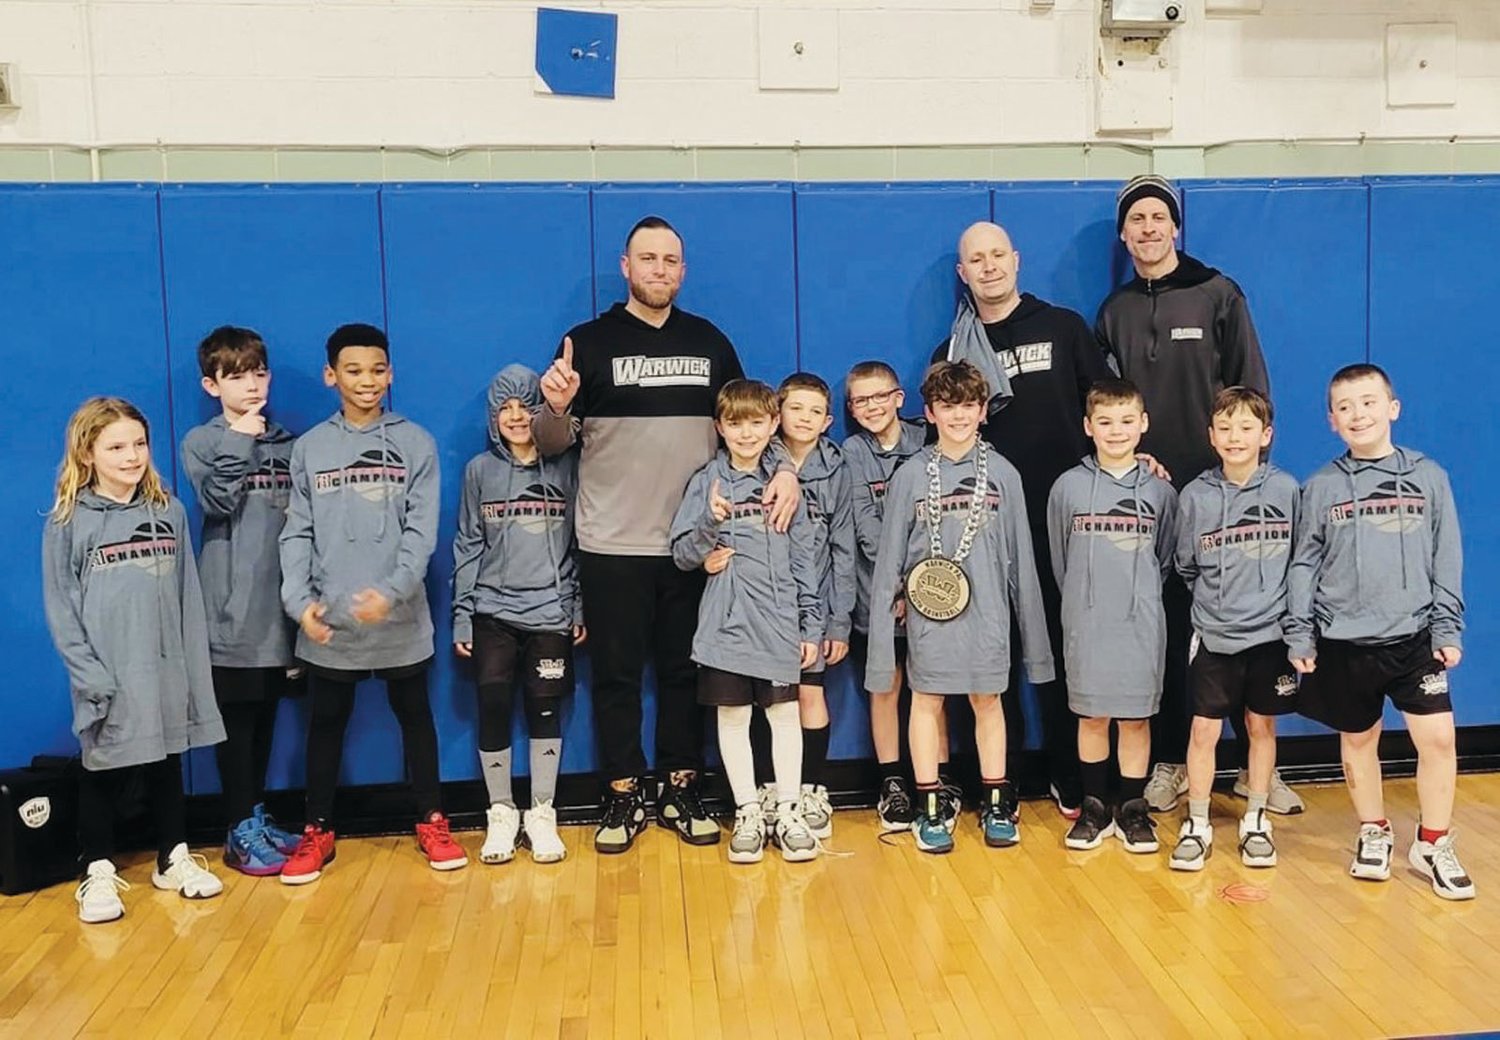 WARRIORS WIN: The PAL 3rd grade A team, which included from left to right: Max Jacob, Max Maloney, Tykem Weeks, Levi Narcavage, Asst. Coach Danny Silva, Danny Silva, Lou Johnston, Cody Banach, James Armstrong, Head Coach Jim Garcia, Harrison Belleville, Asst. Coach Dave Narcavage, Teddy Mackowitz, and Maximus Garcia.